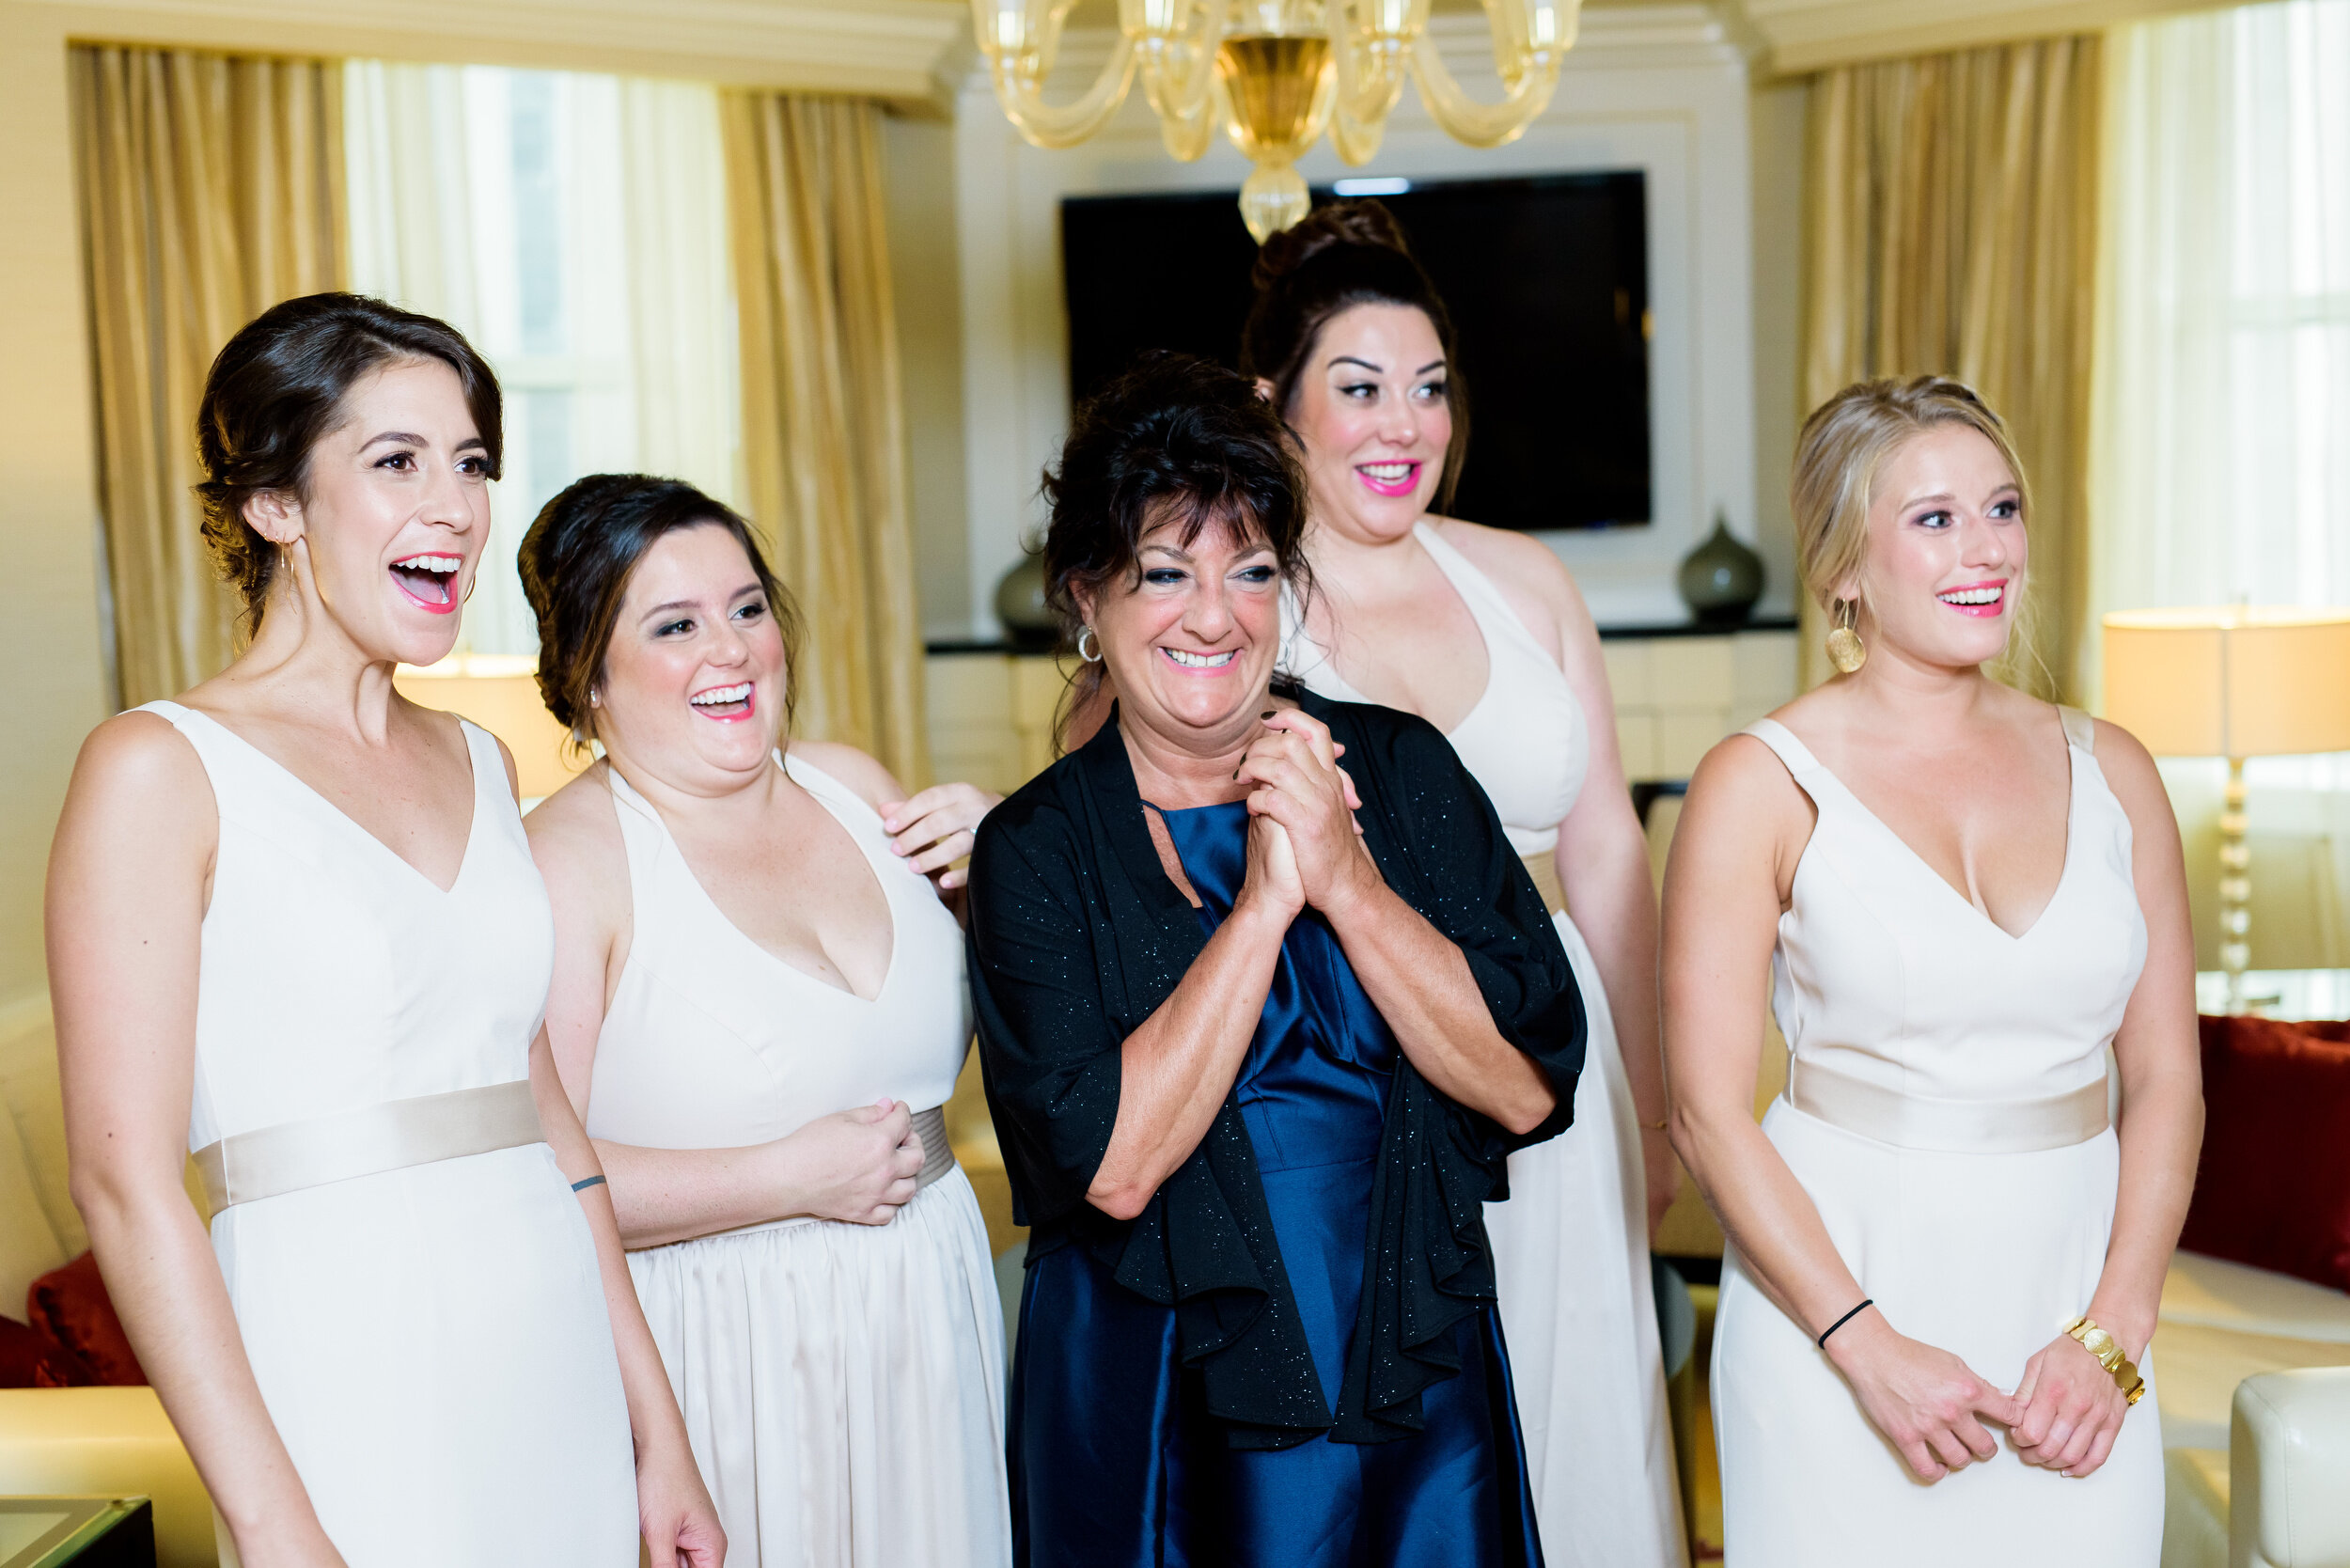 Bridesmaids first look of the bride at the JW Marriott: Geraghty Chicago wedding photography captured by J. Brown Photography.